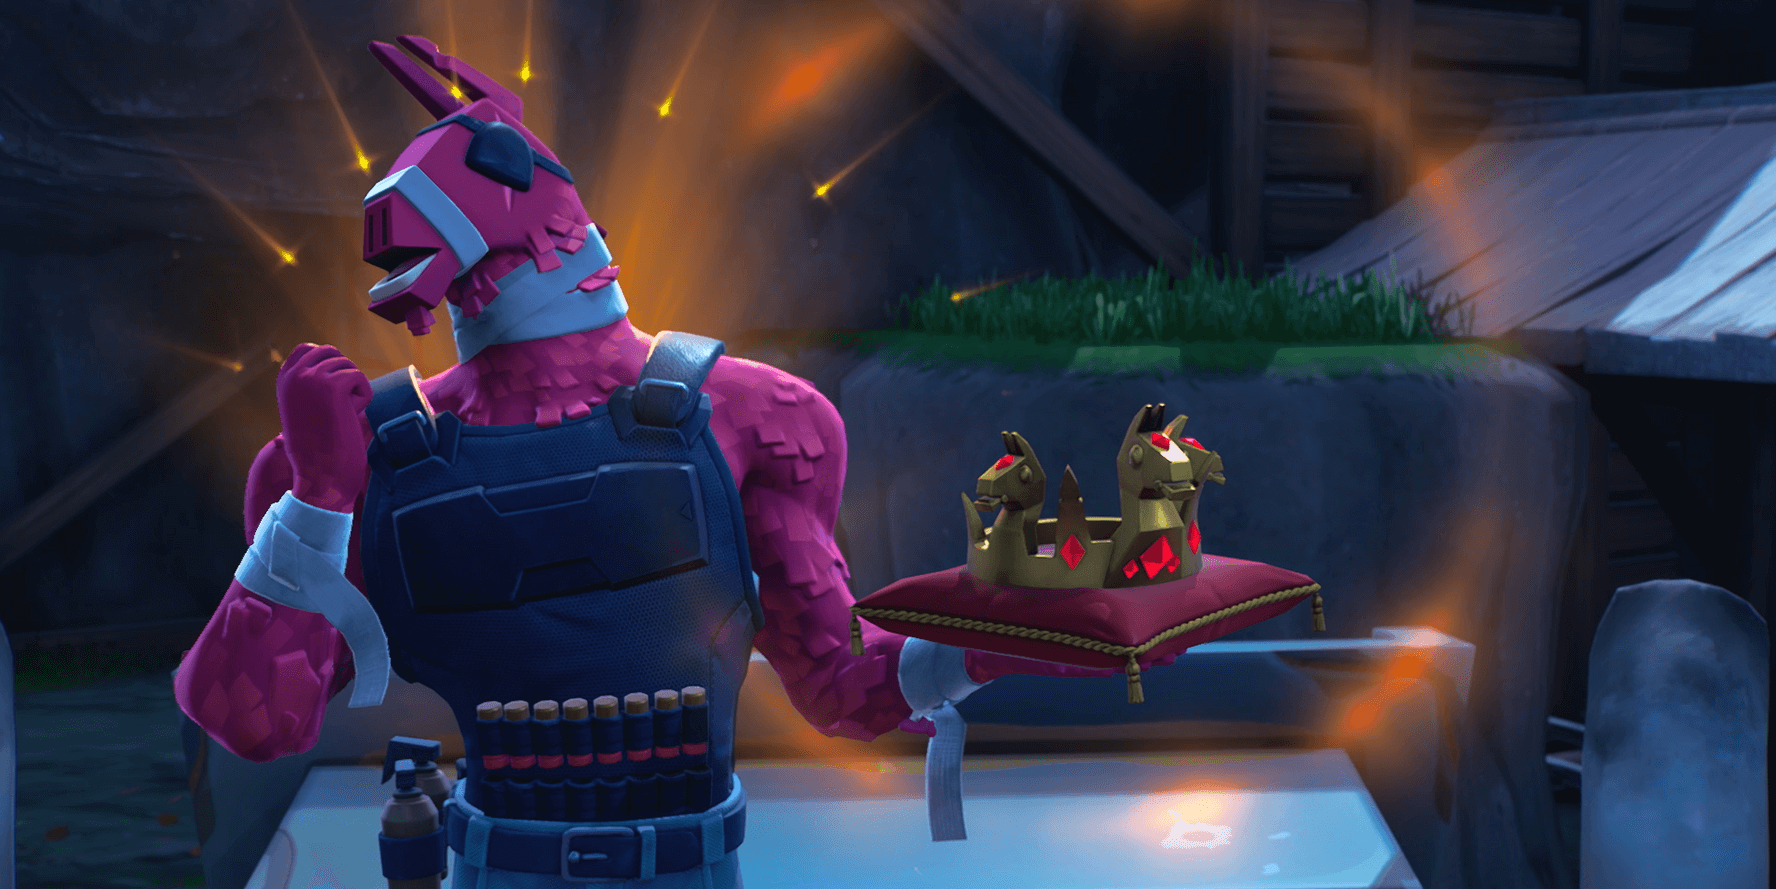 All seasonal quests and challenges in Fortnite Chapter 3 season one's week one